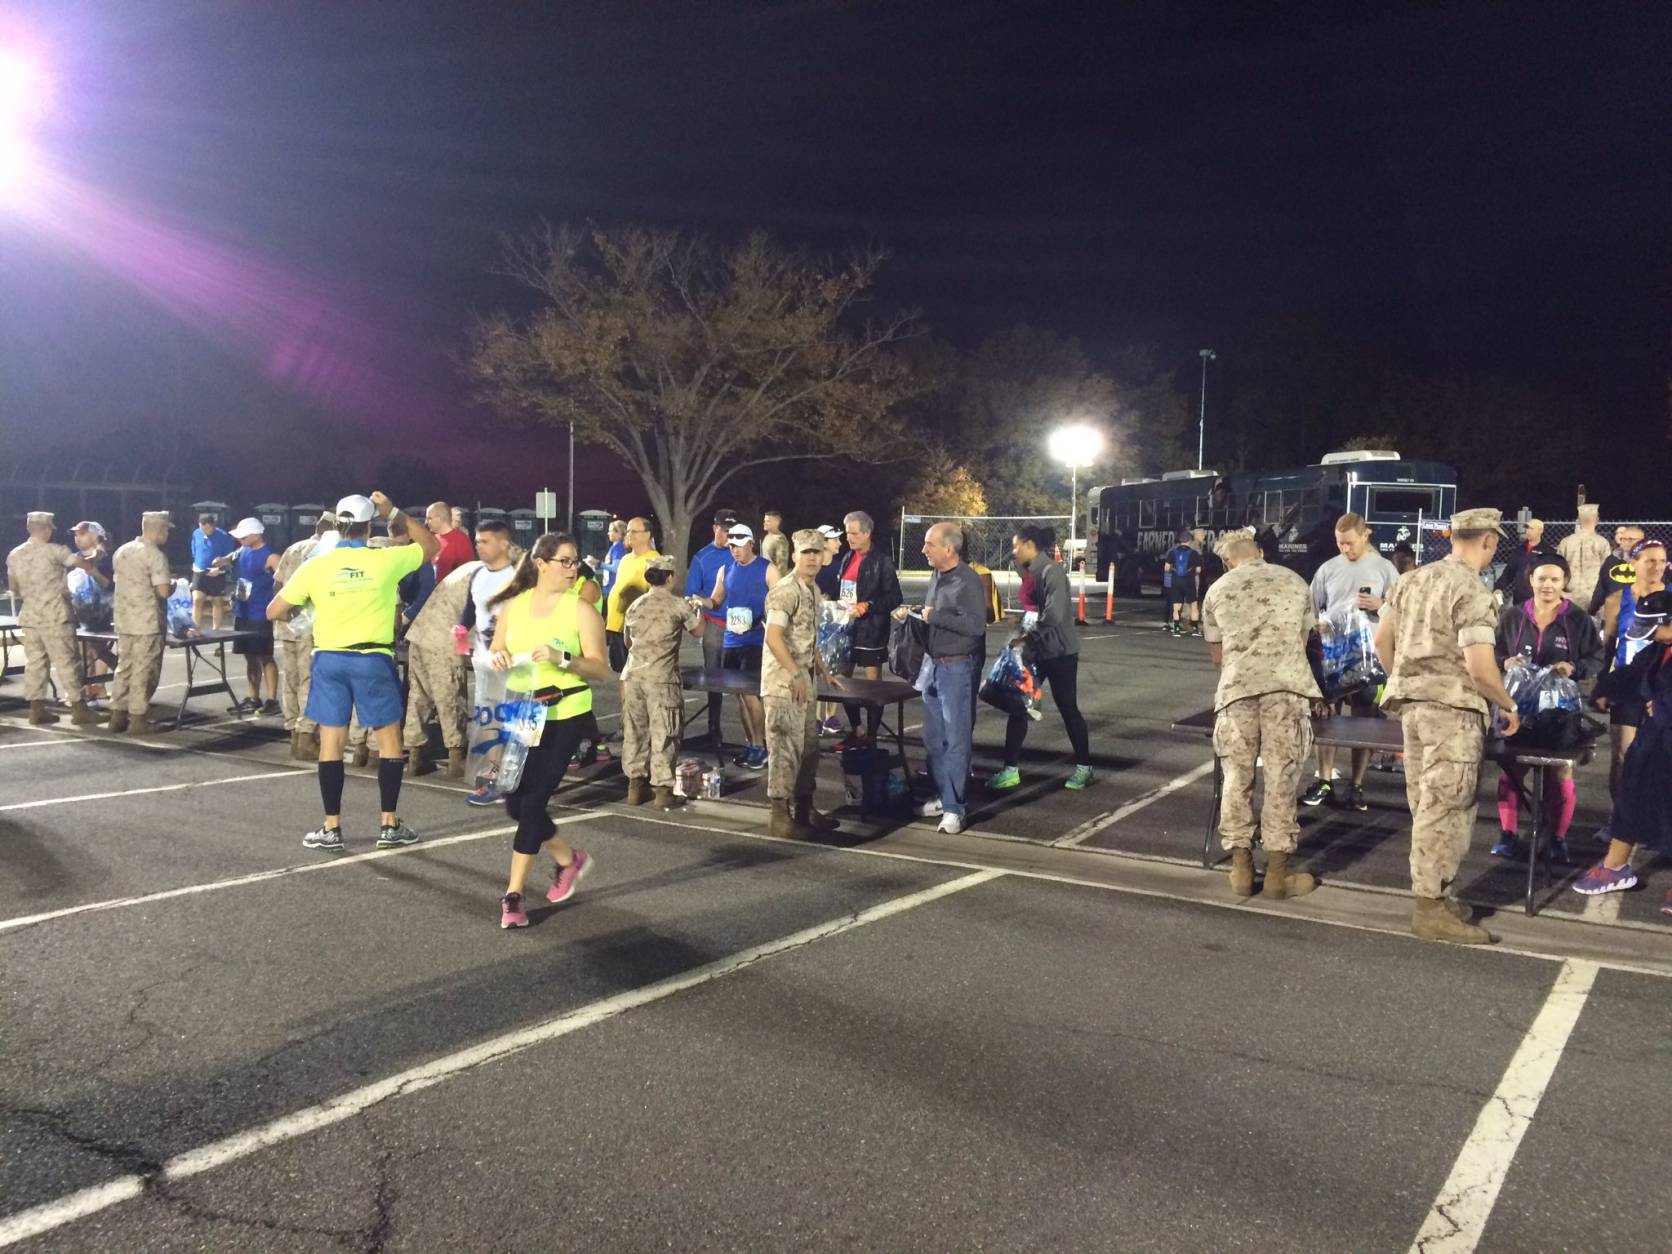 WTOP's Sarah Beth Hensley seems pretty happy there are no lines for security at the Marine Corps Marathon. (WTOP/Sarah Beth Hensley)